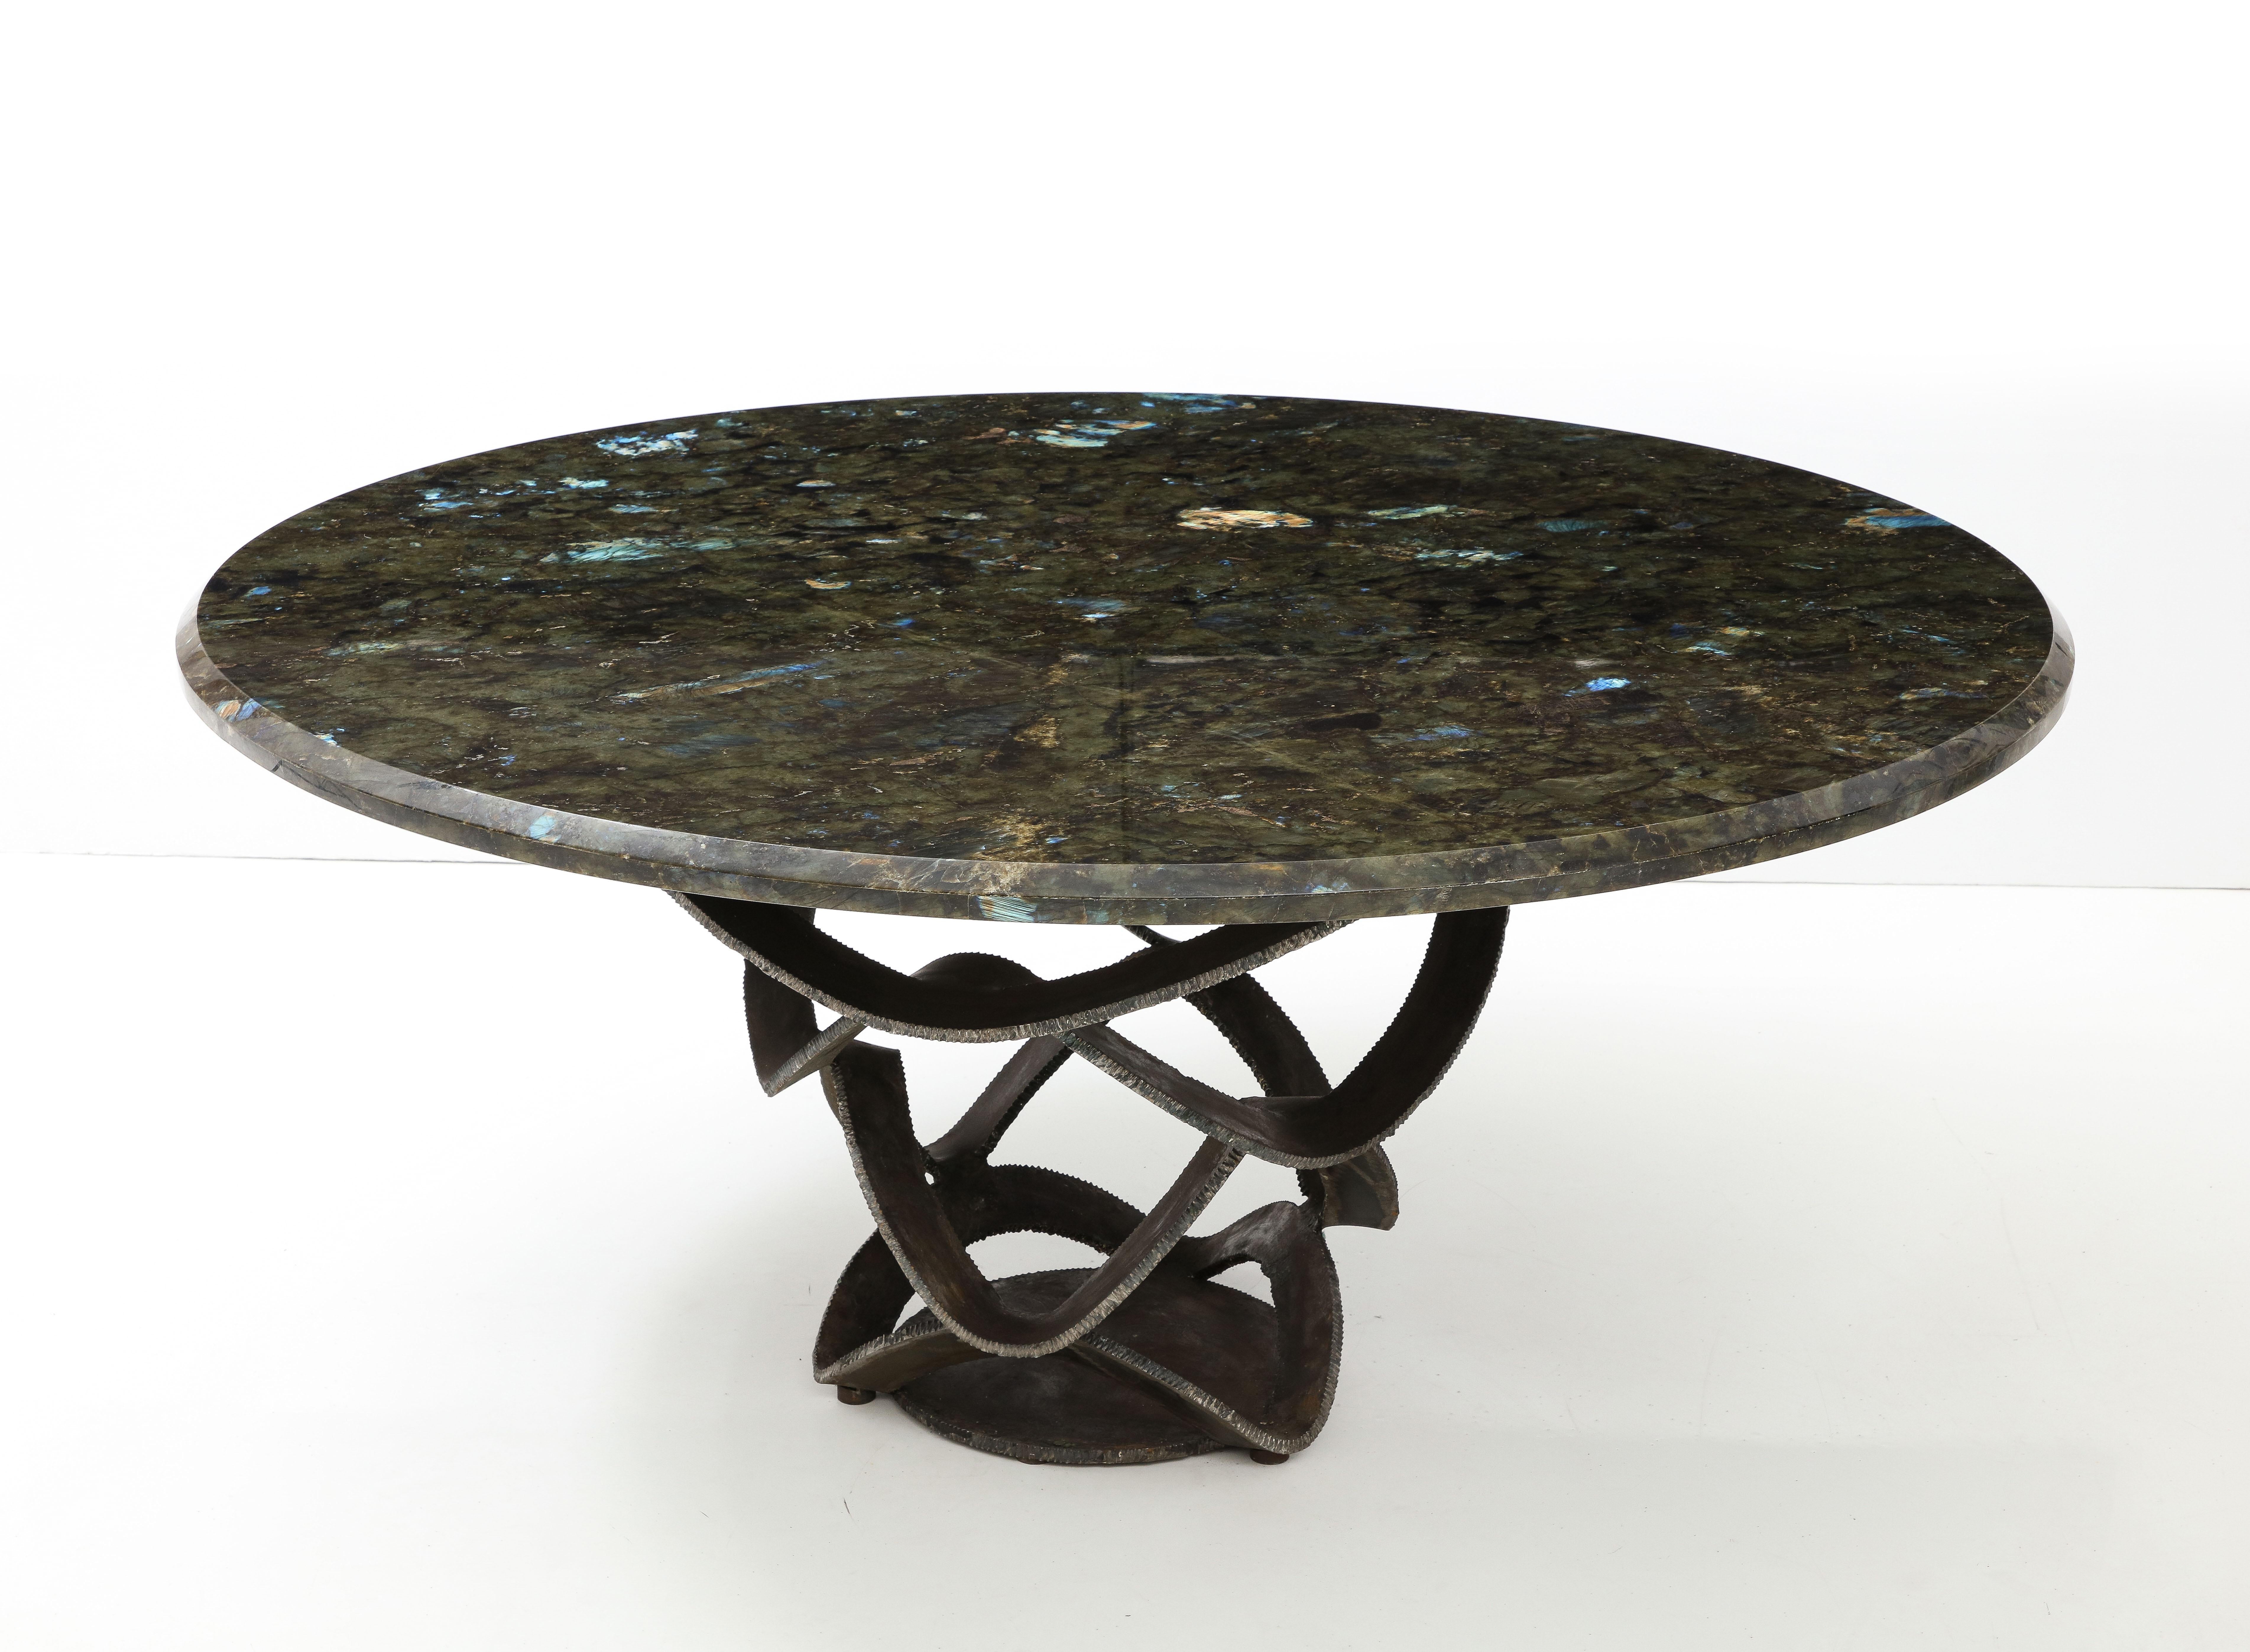 Spectacular 1970's Mid Century Modern Forged Steel and Labradorite Stone Table In Good Condition For Sale In New York, NY